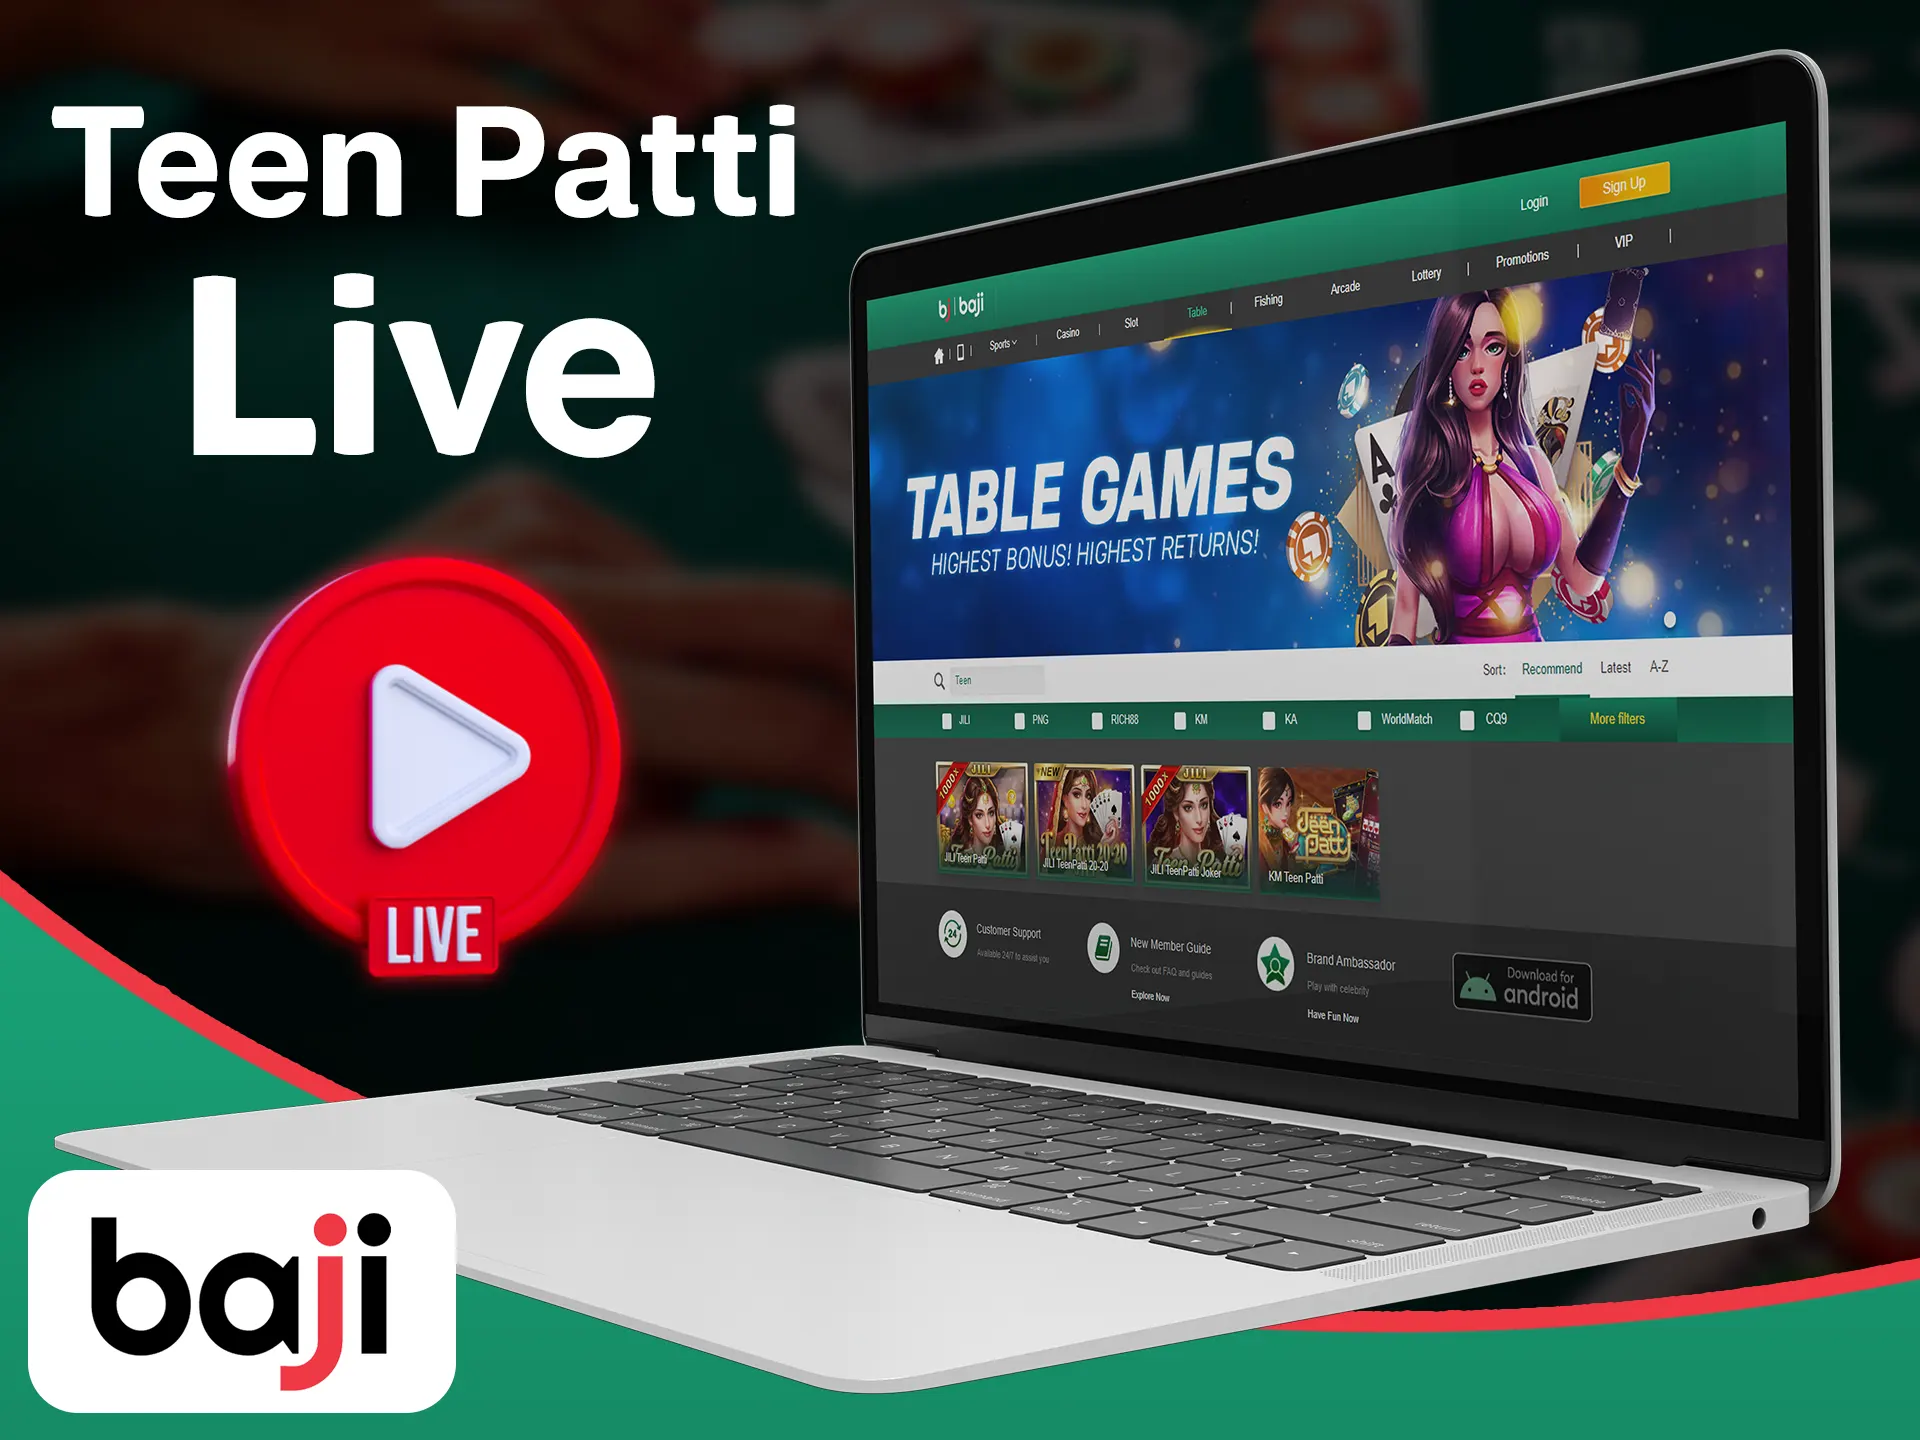 Play teen patti games in live at the Baji.